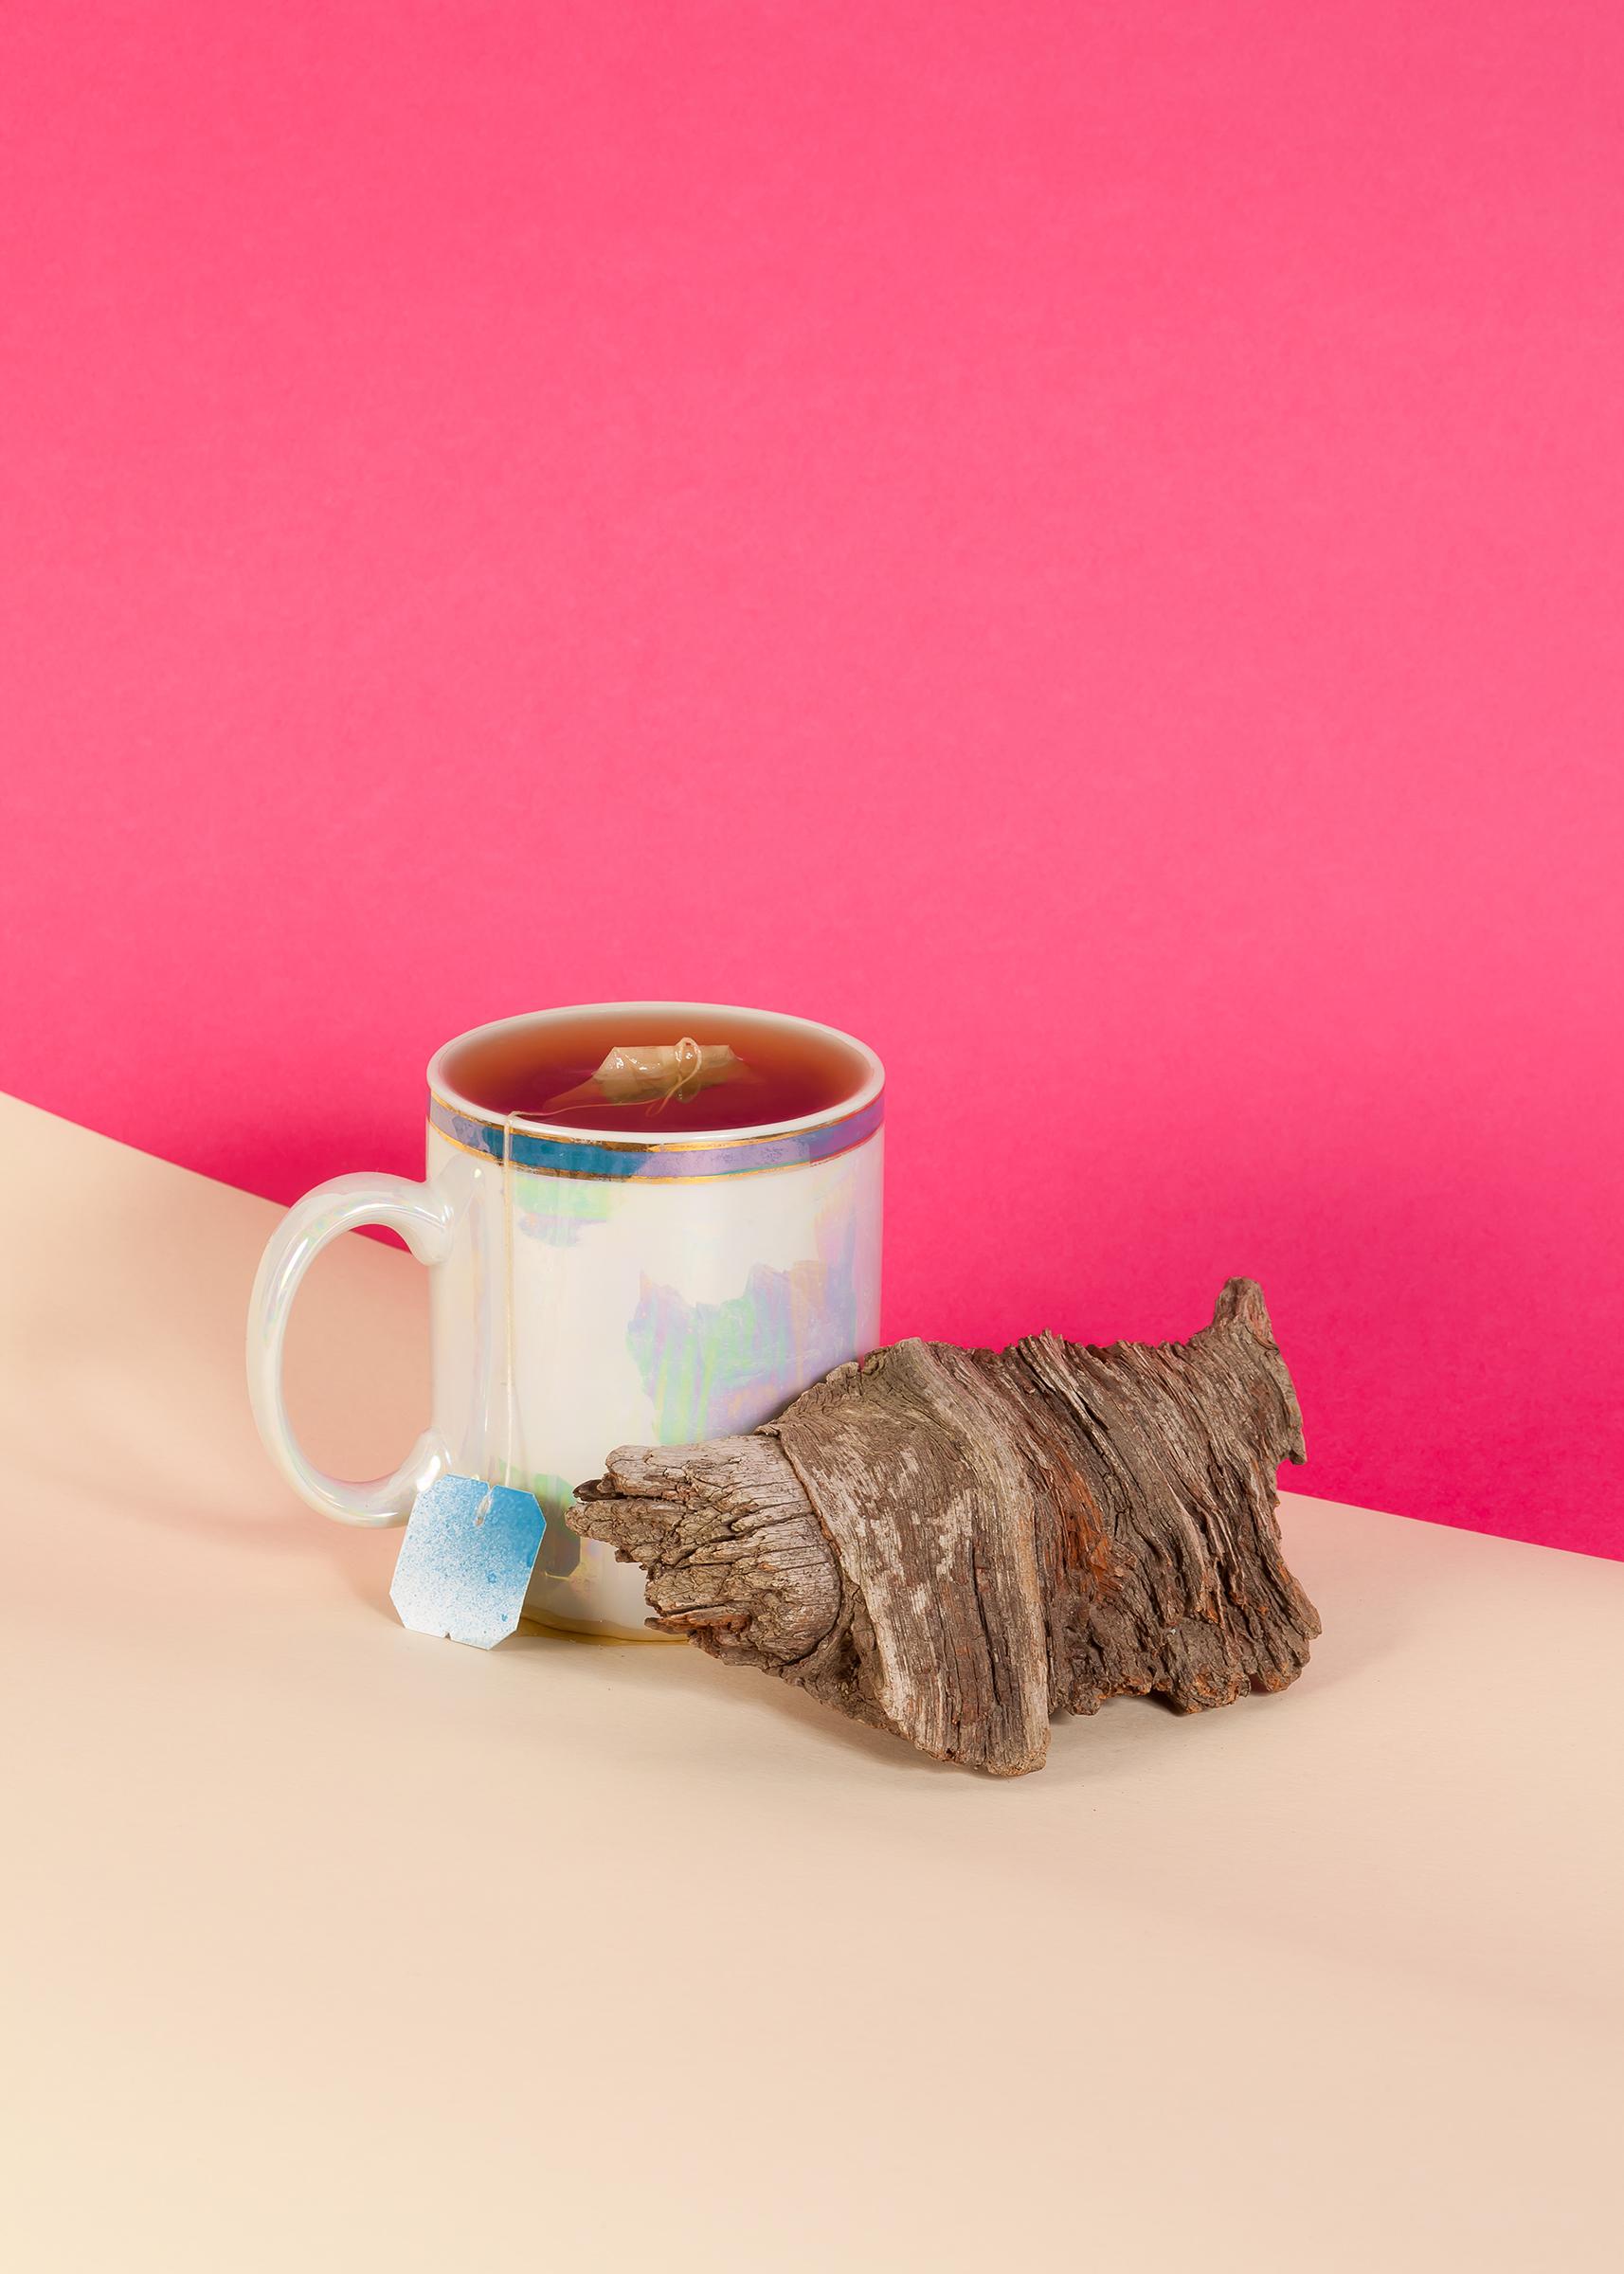 Pink Background Still Life Scene, Cup of Tea, Wood Croissant, Retro, Giclée 